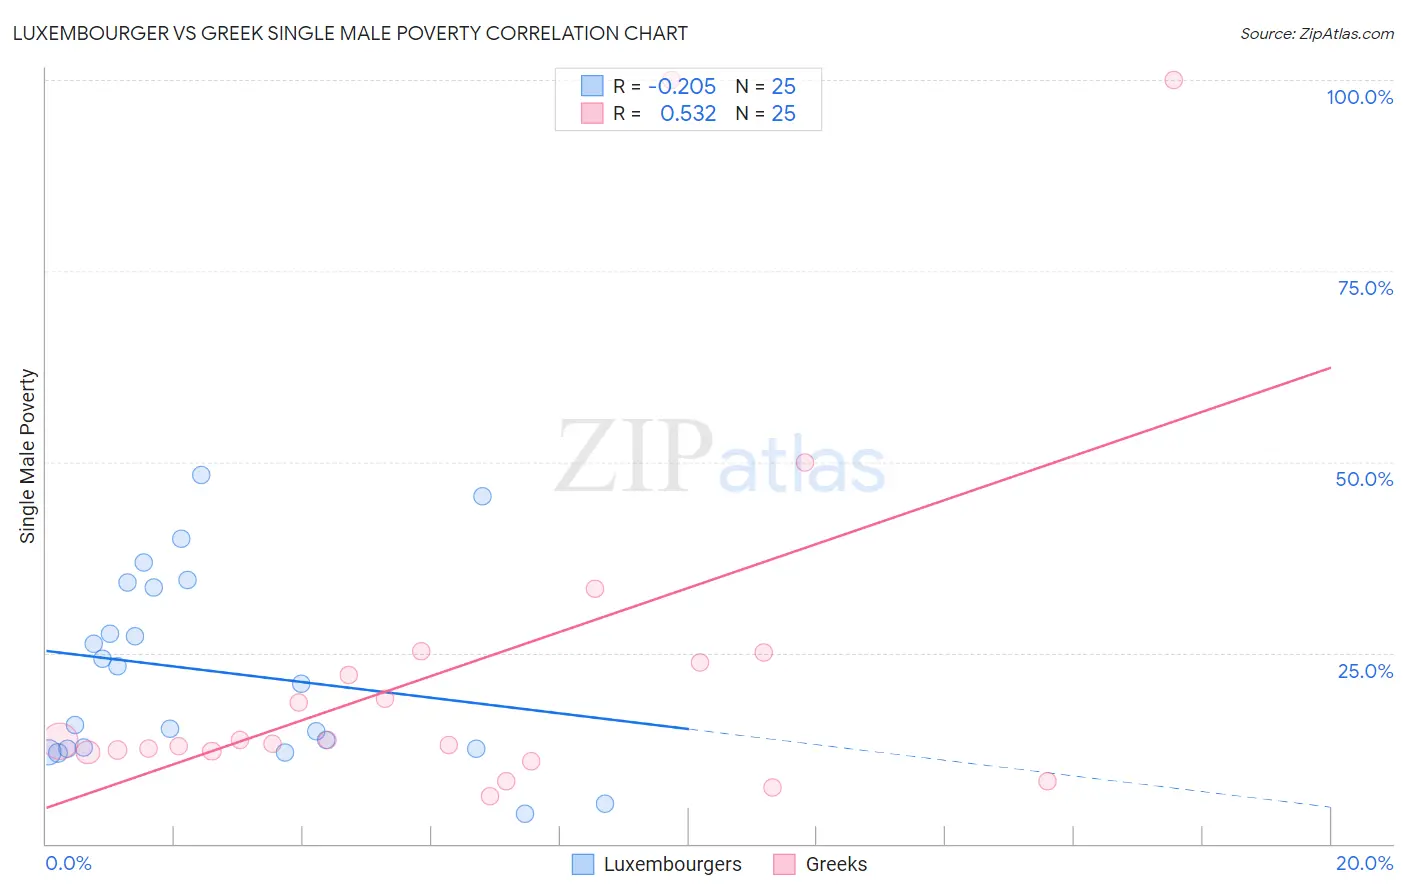 Luxembourger vs Greek Single Male Poverty